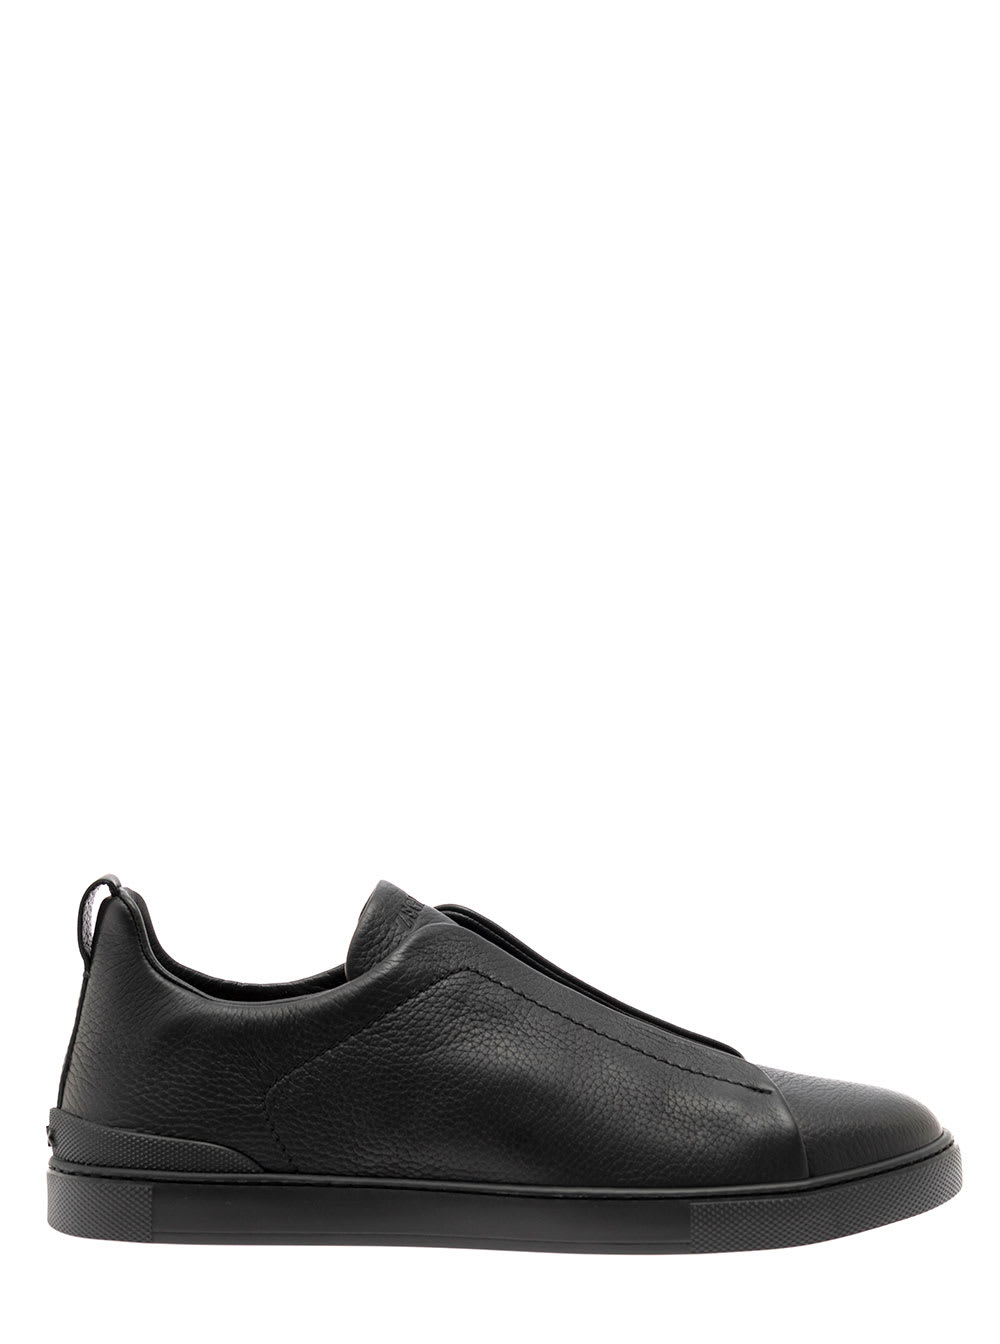 Z Zegna Triple Stitch Sneakers Without Laces In Black Leather Man Z Zegna